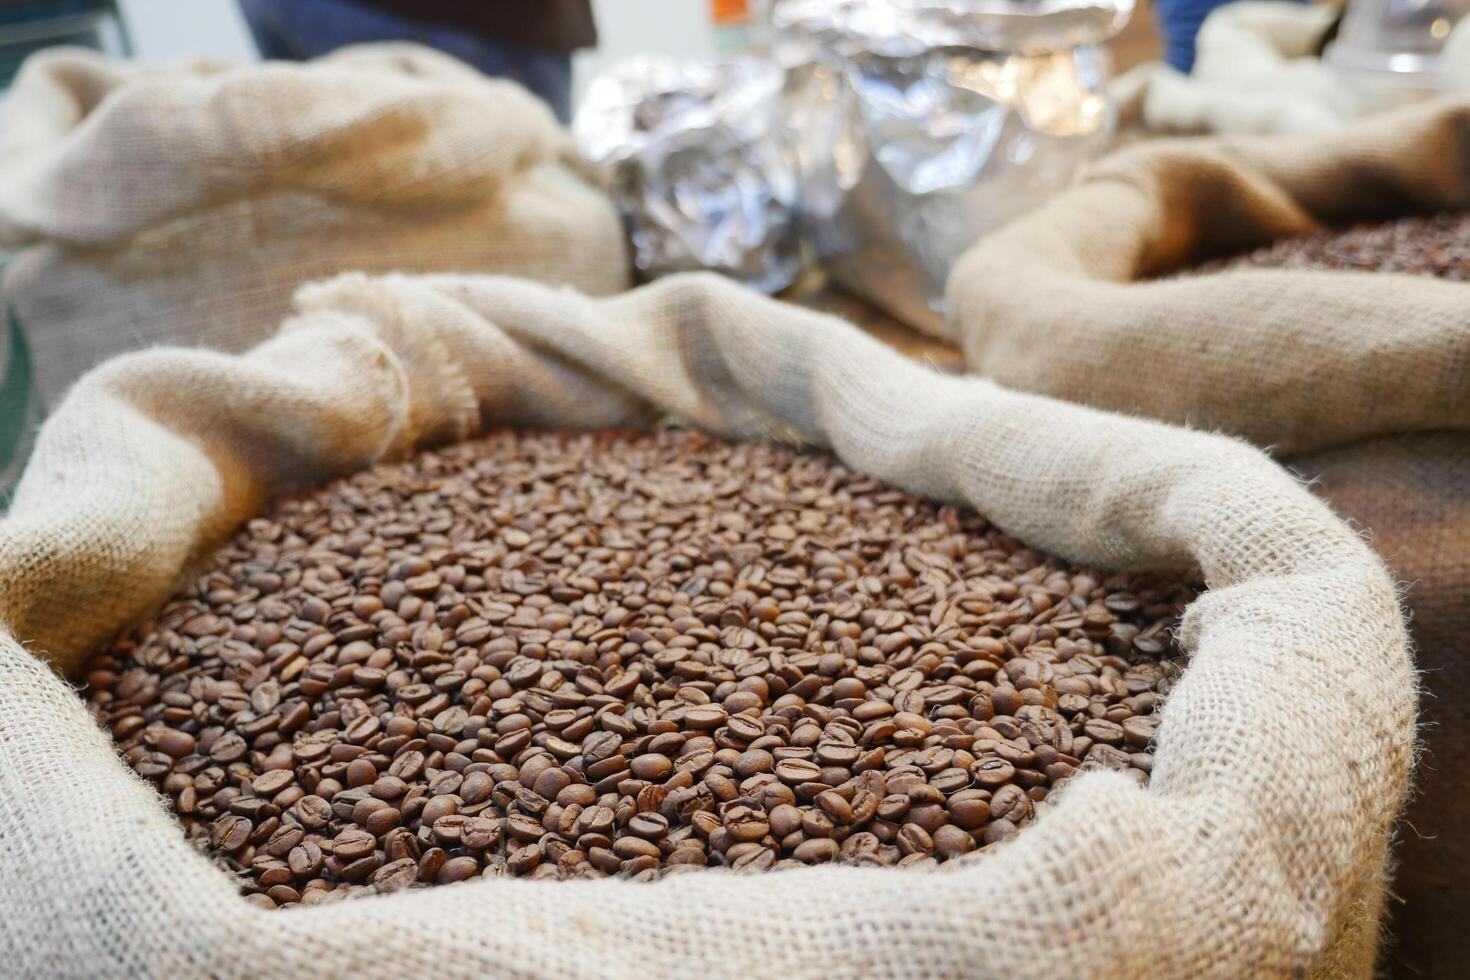 A bag of coffee beans selling at istanbul market photo